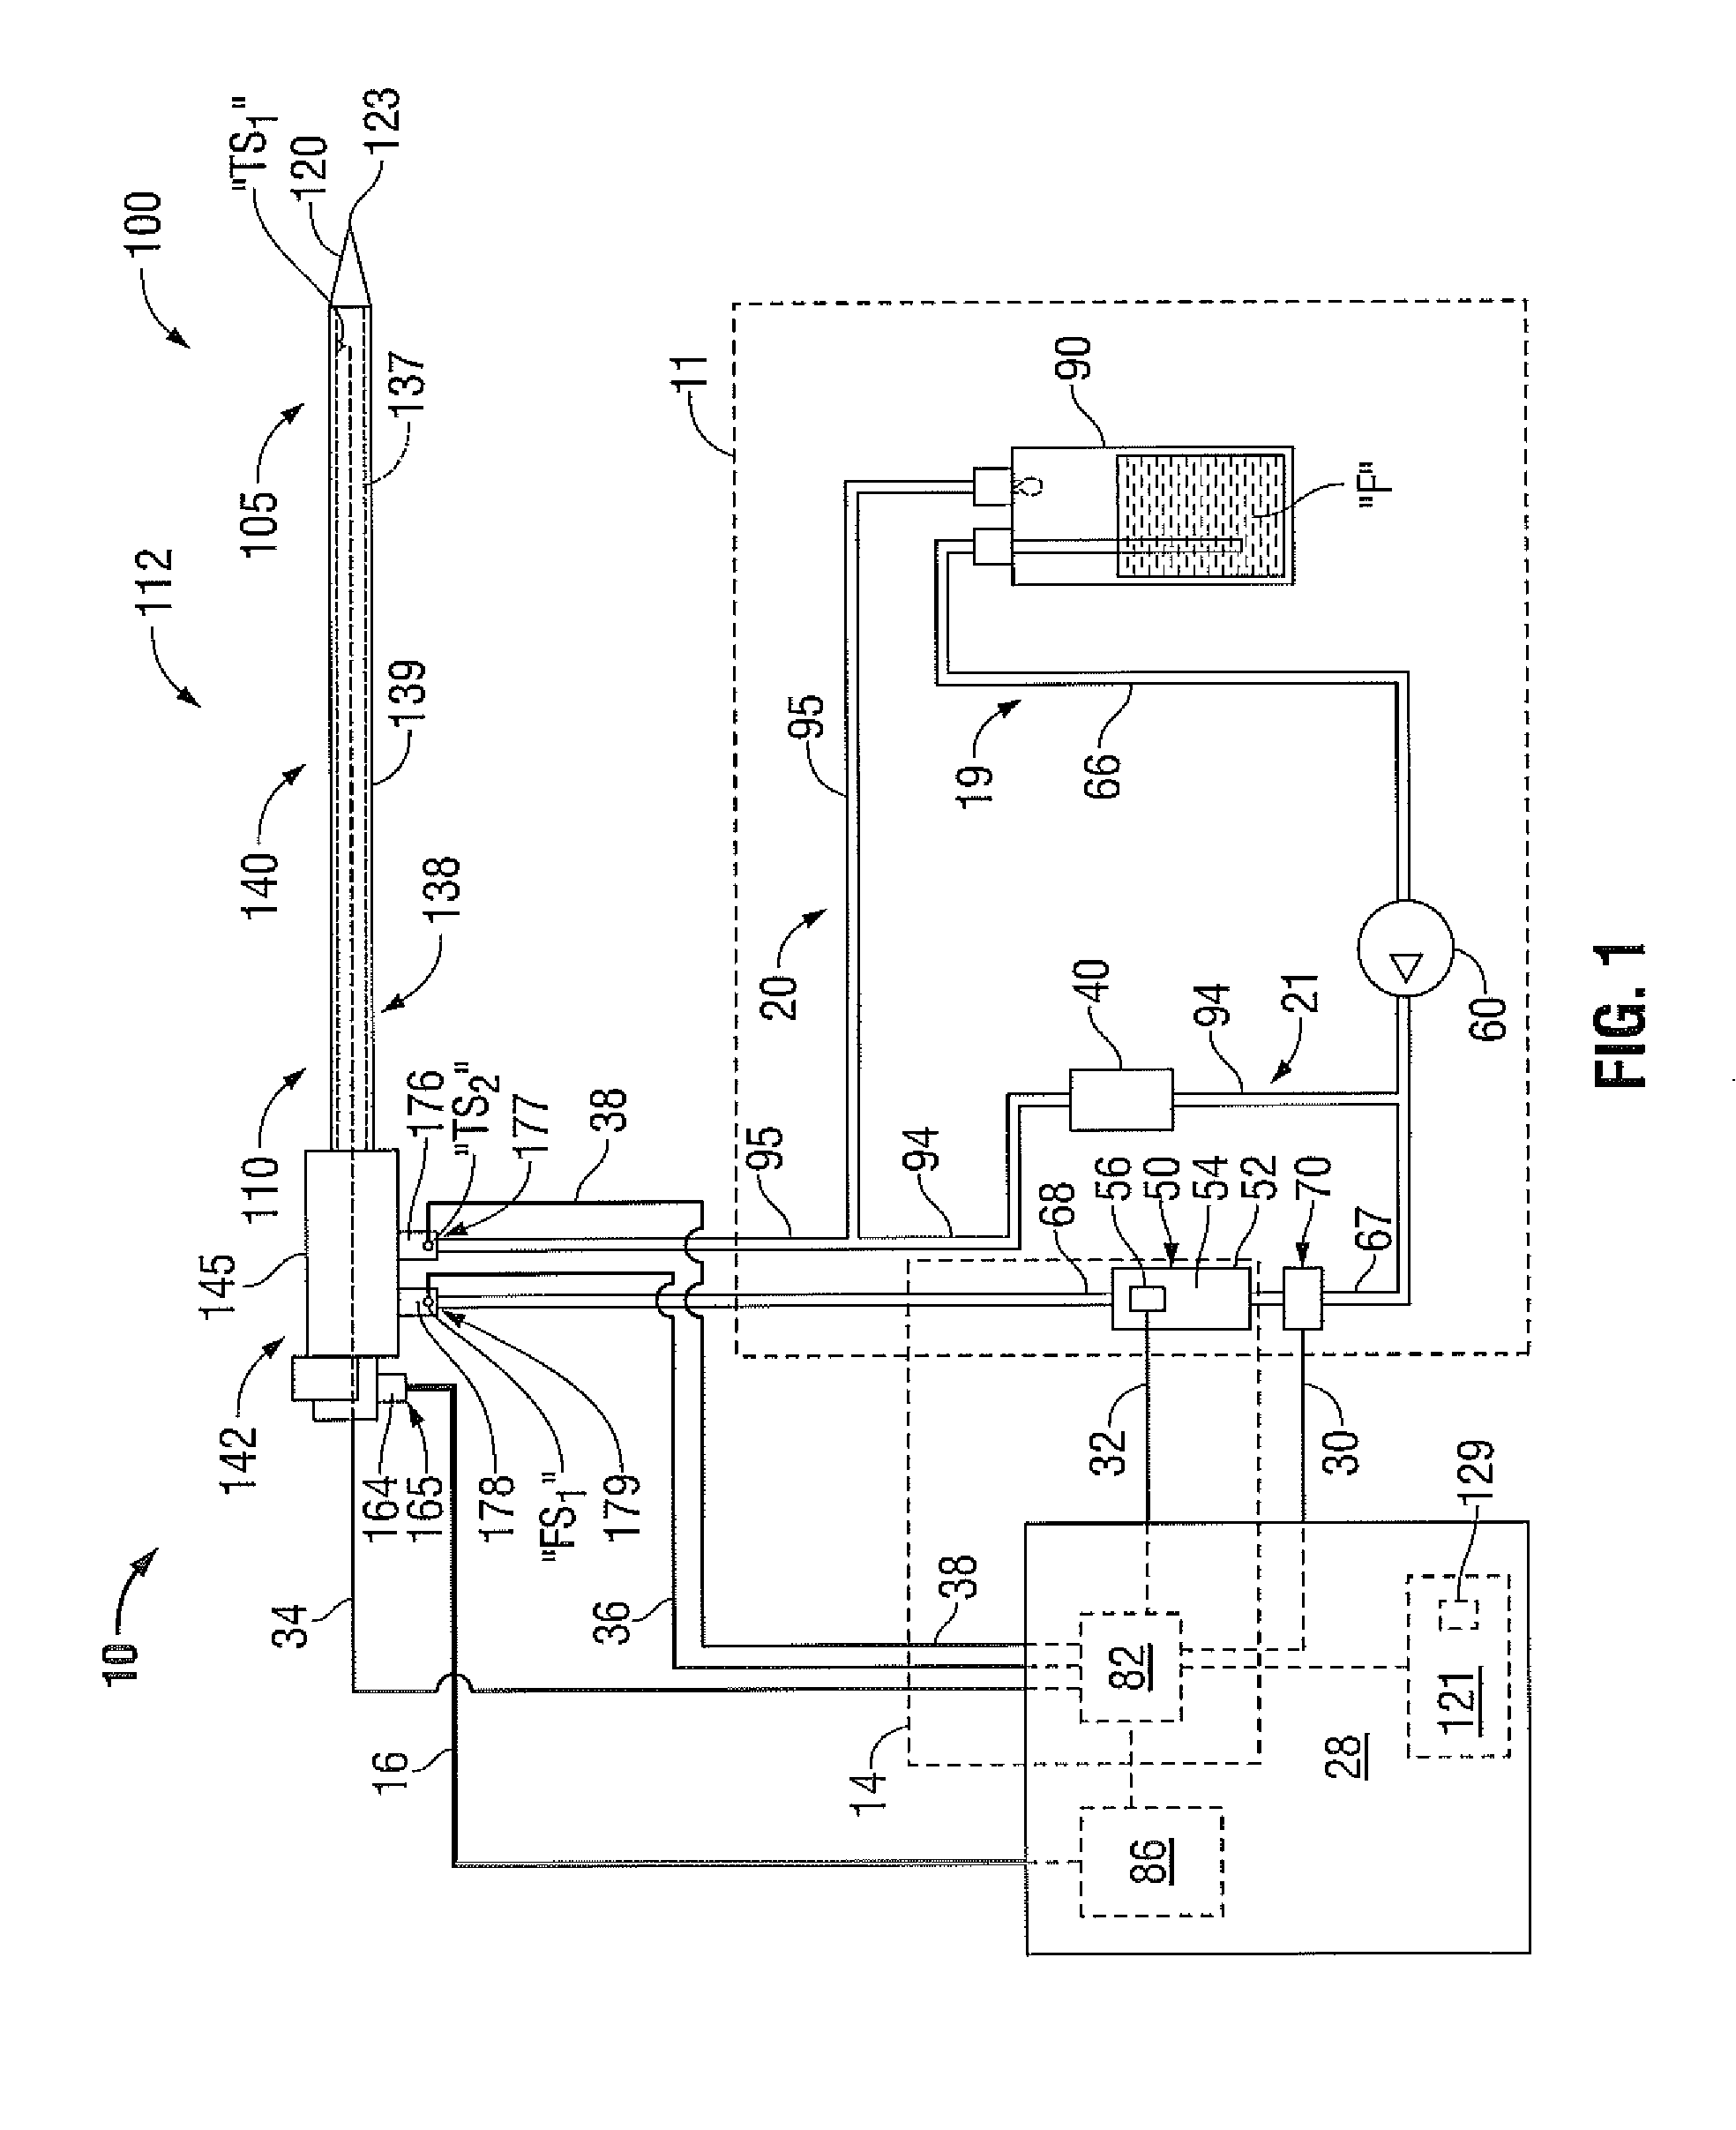 Systems for thermal-feedback-controlled rate of fluid flow to fluid-cooled antenna assembly and methods of directing energy to tissue using same